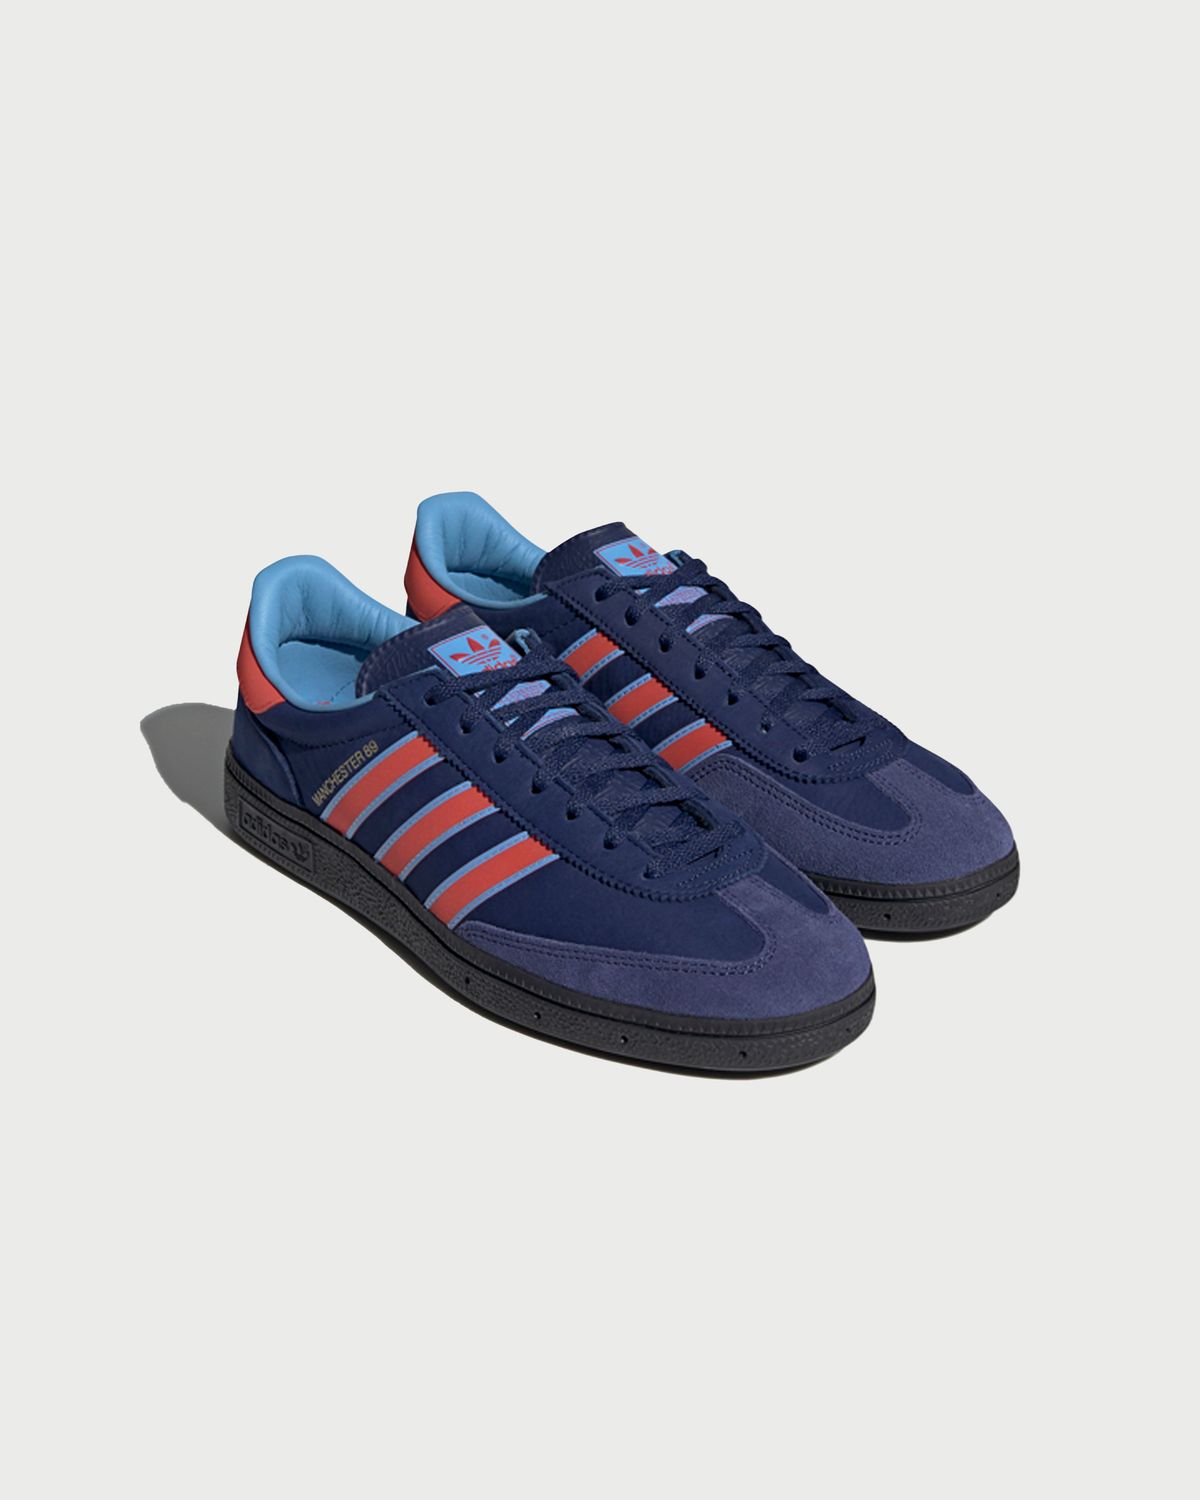 Adidas – Spezial Manchester 89 Trainer Navy - Sneakers - Blue - Image 2